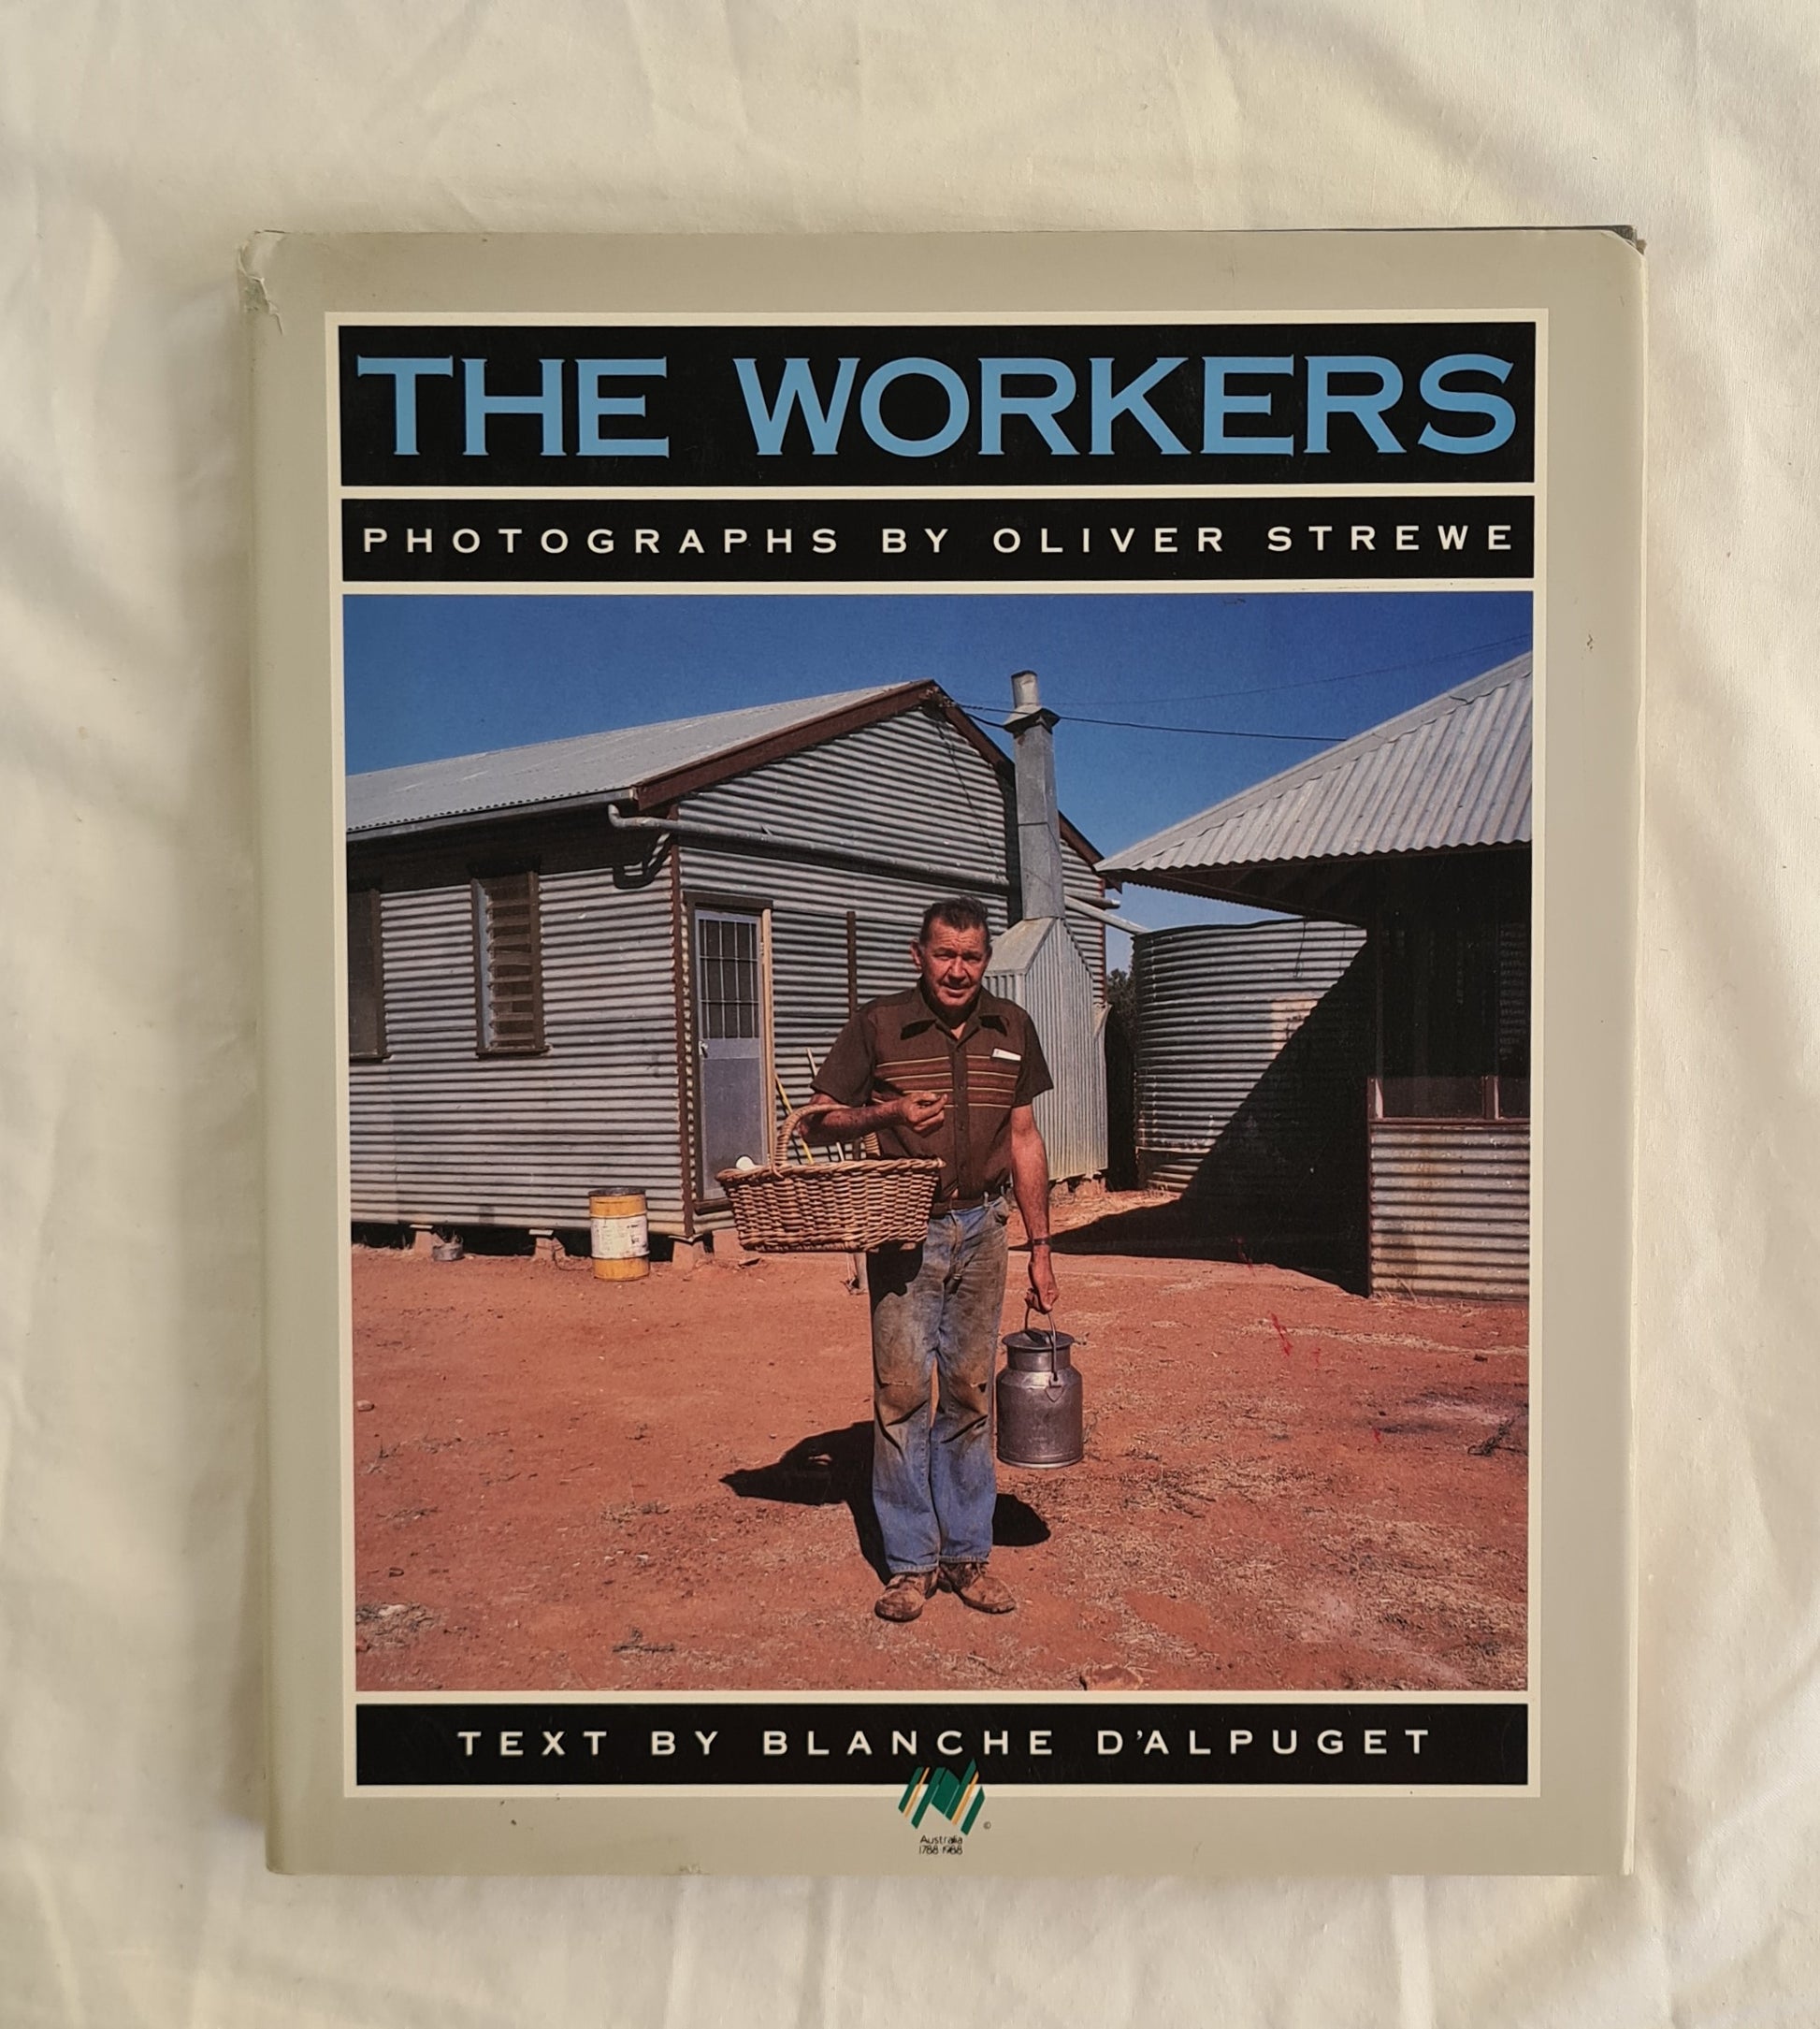 The Workers  by Blanche D’Alpuget  Photographs by Oliver Strewe